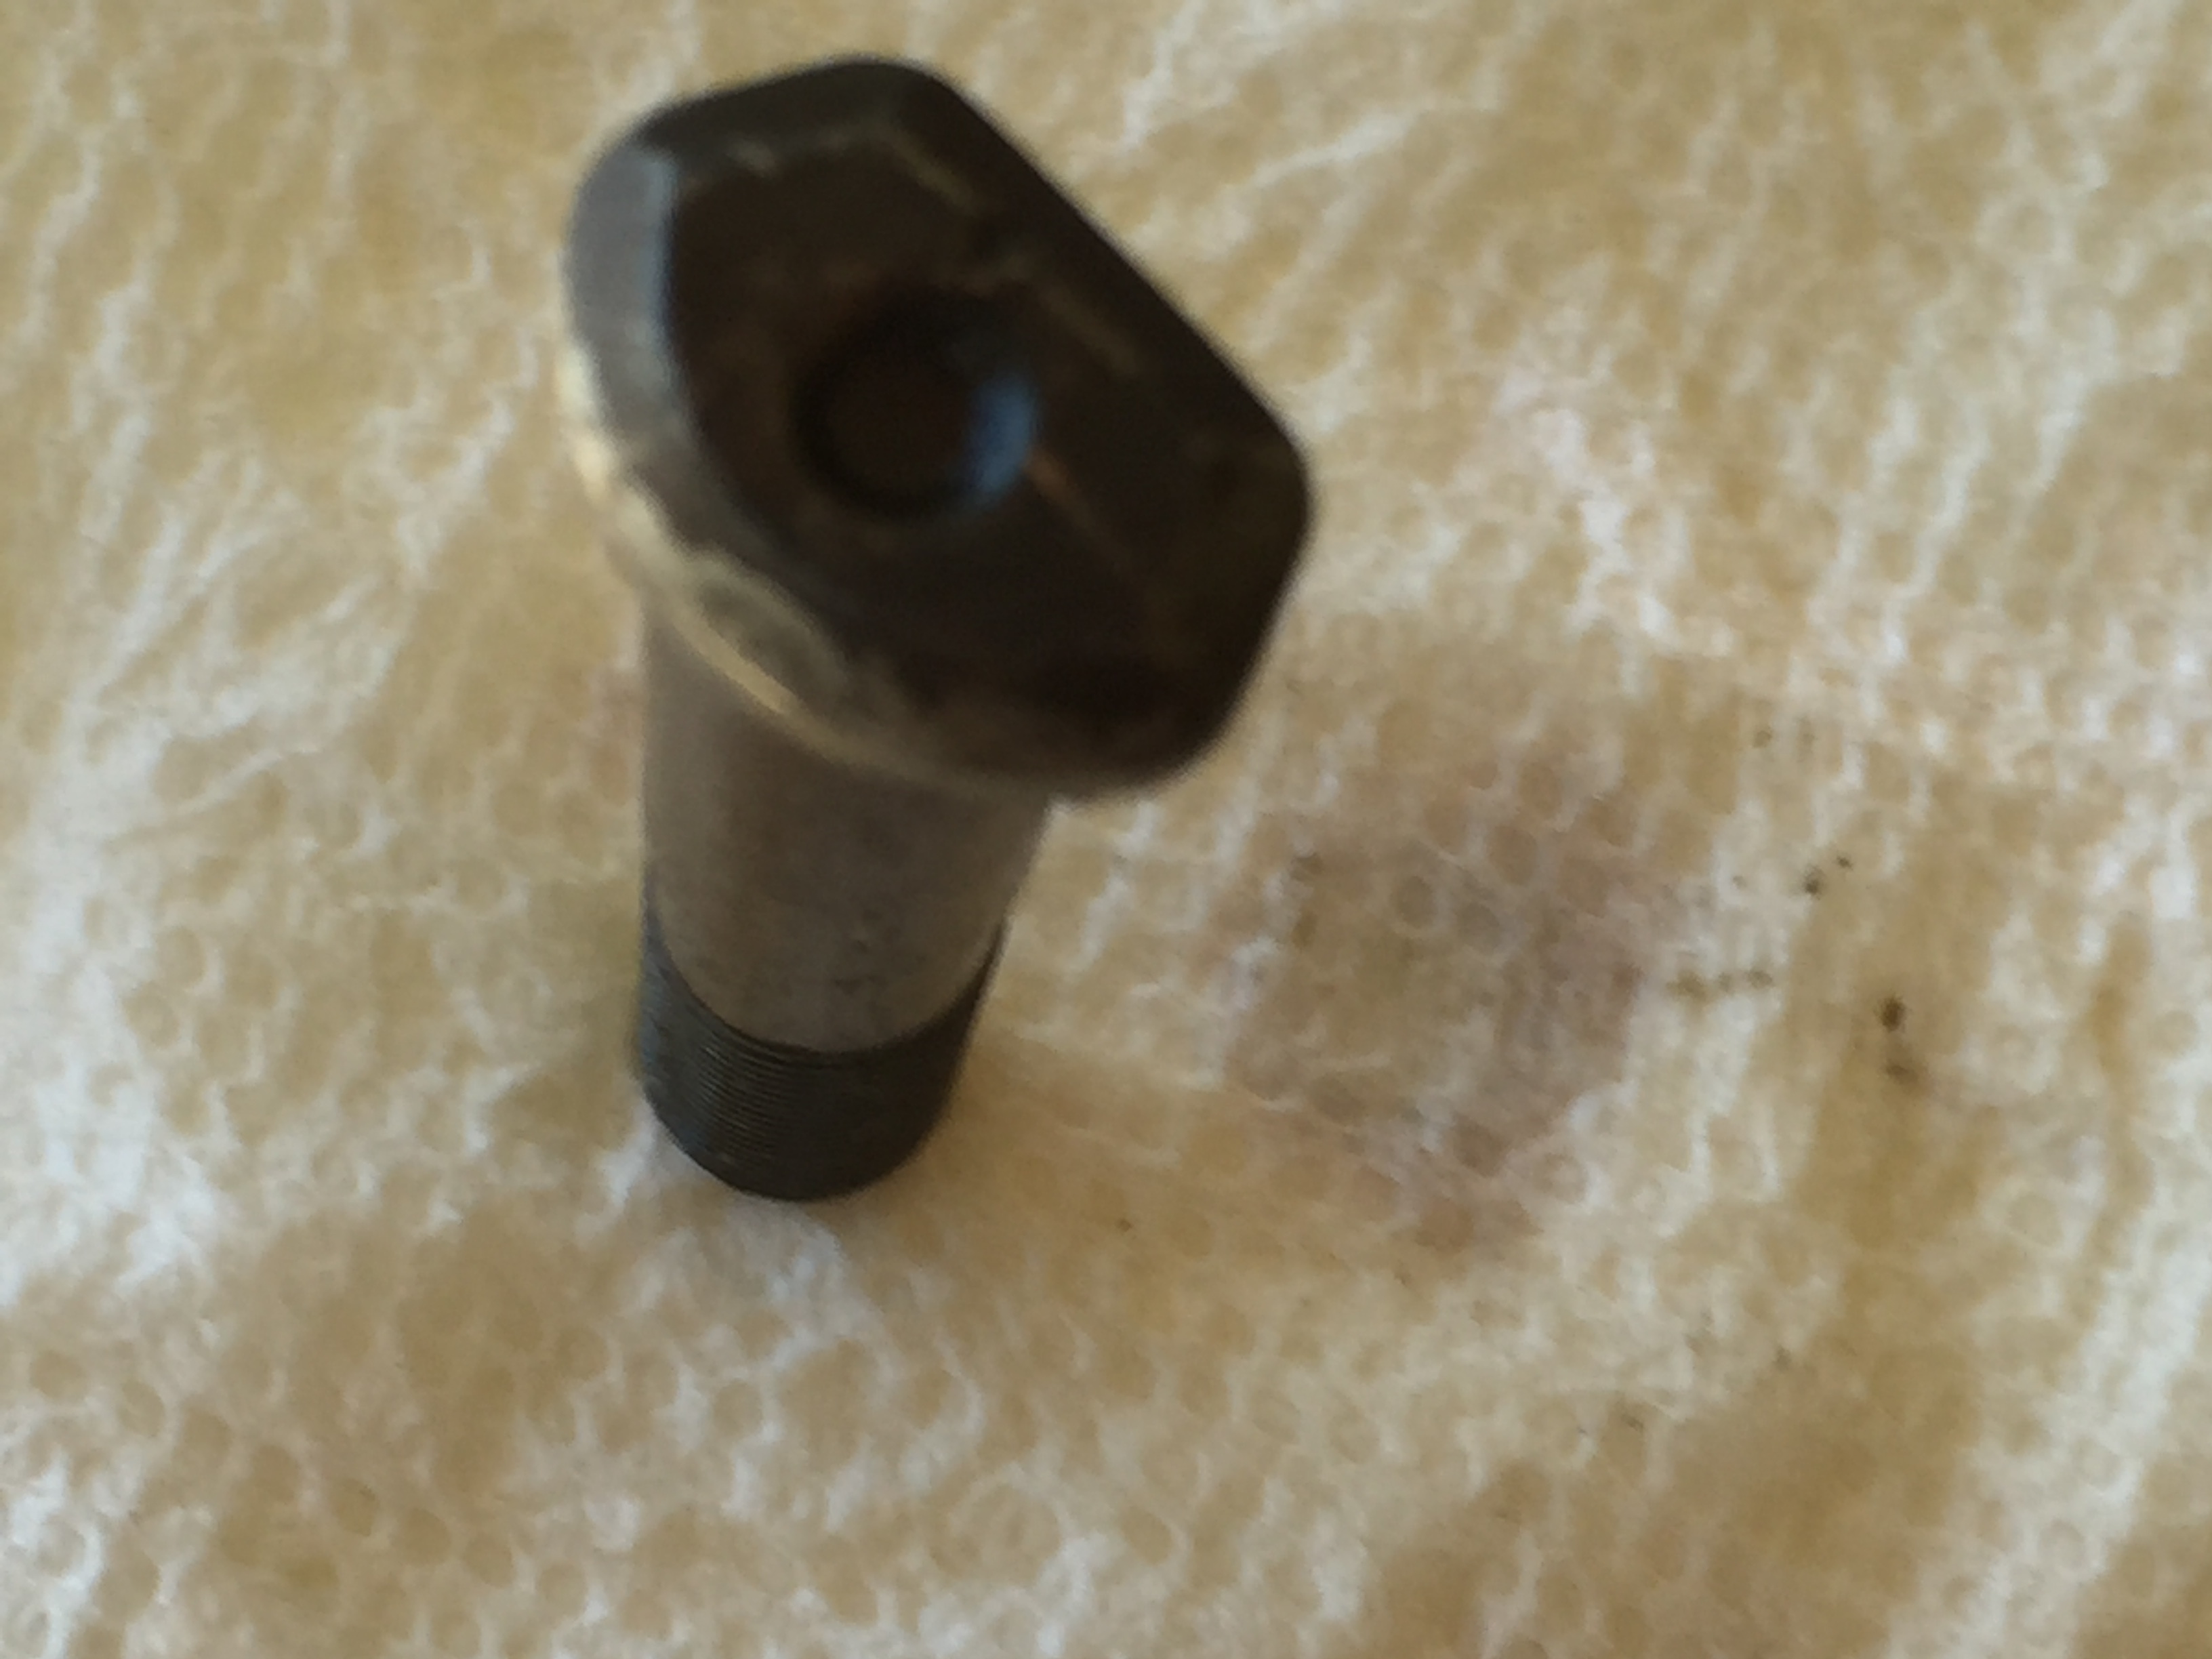 I was told this is a rod bolt